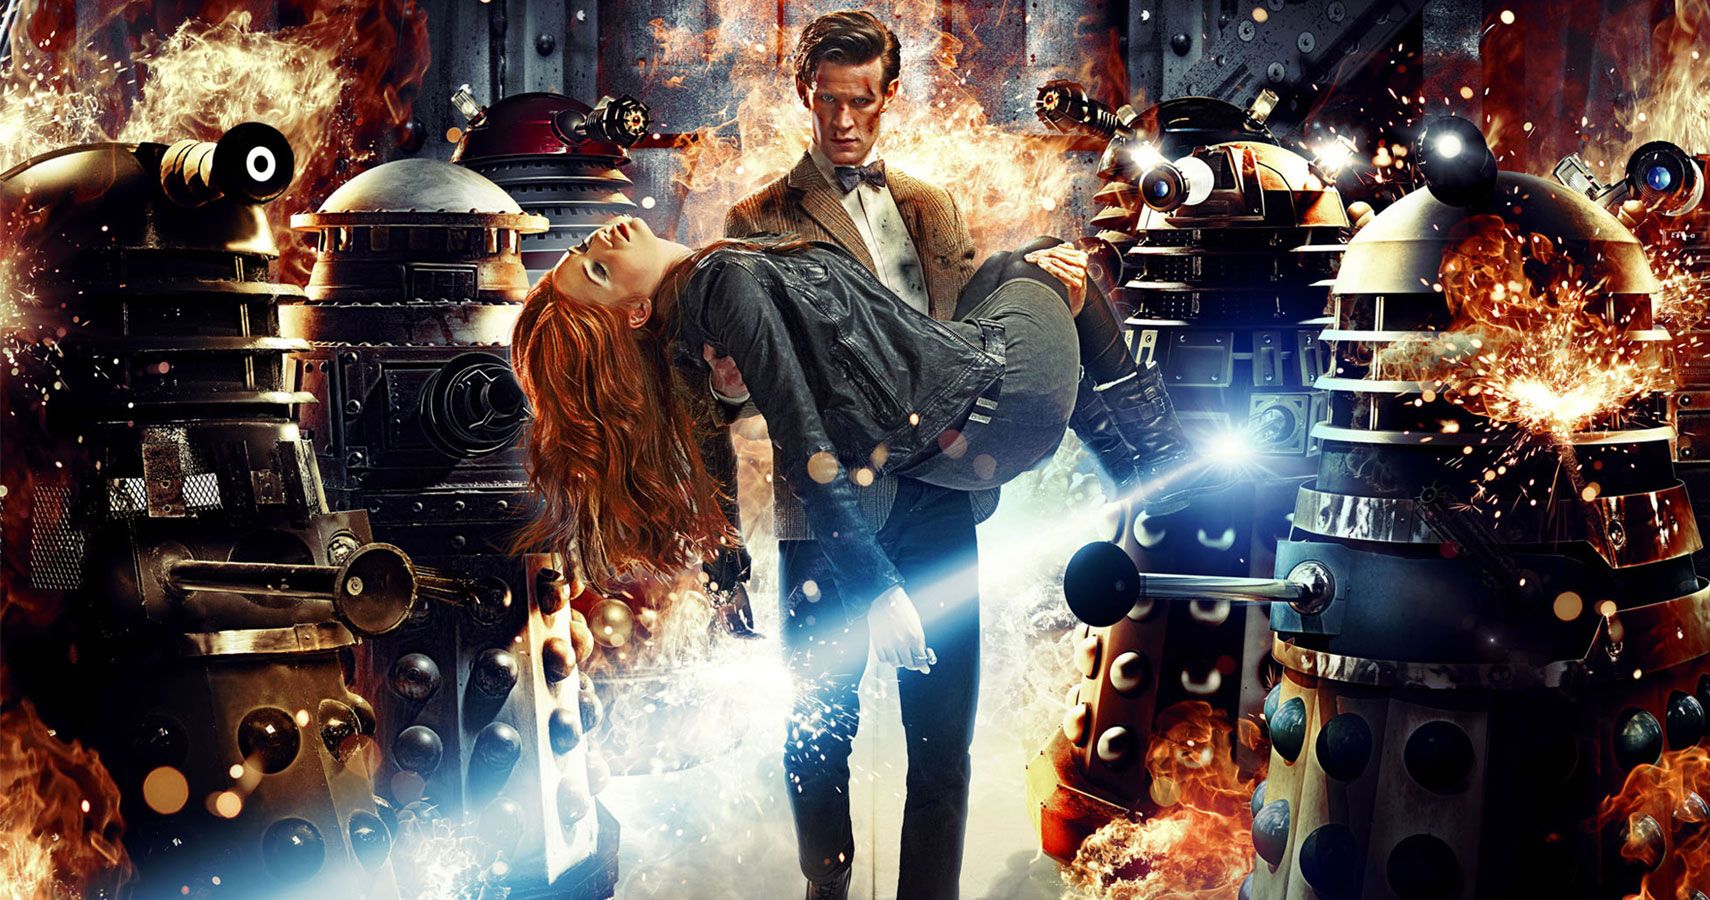 Doctor Who 10 Ways The Daleks Need To Evolve As Villains RELATED The Sarah Jane Adventures 10 Best Episodes of the Doctor Who SpinOff